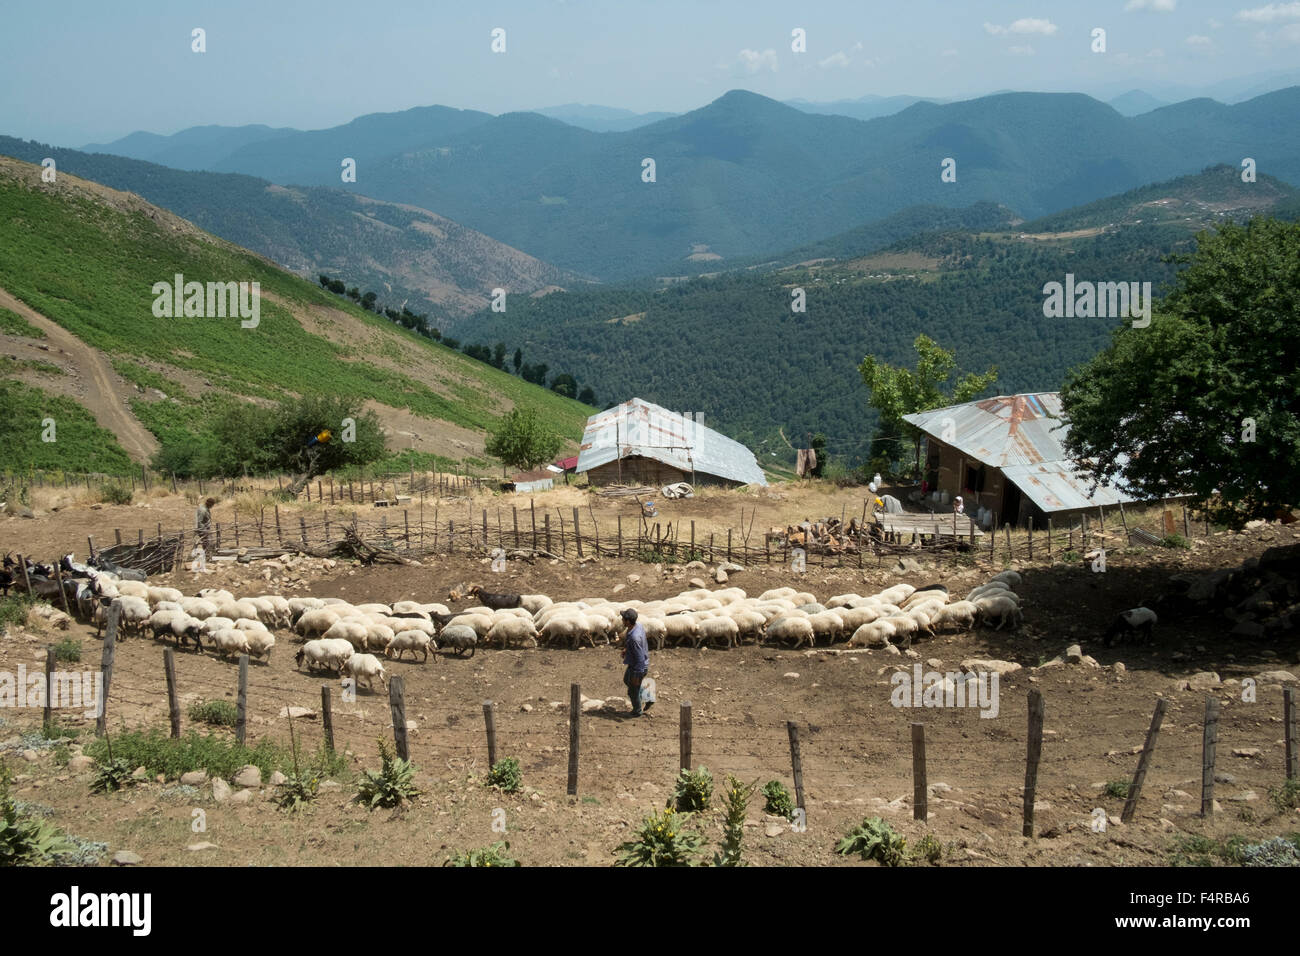 A farmer with his flock of sheep and goats in Almaas, Gilnan, Iran. Stock Photo